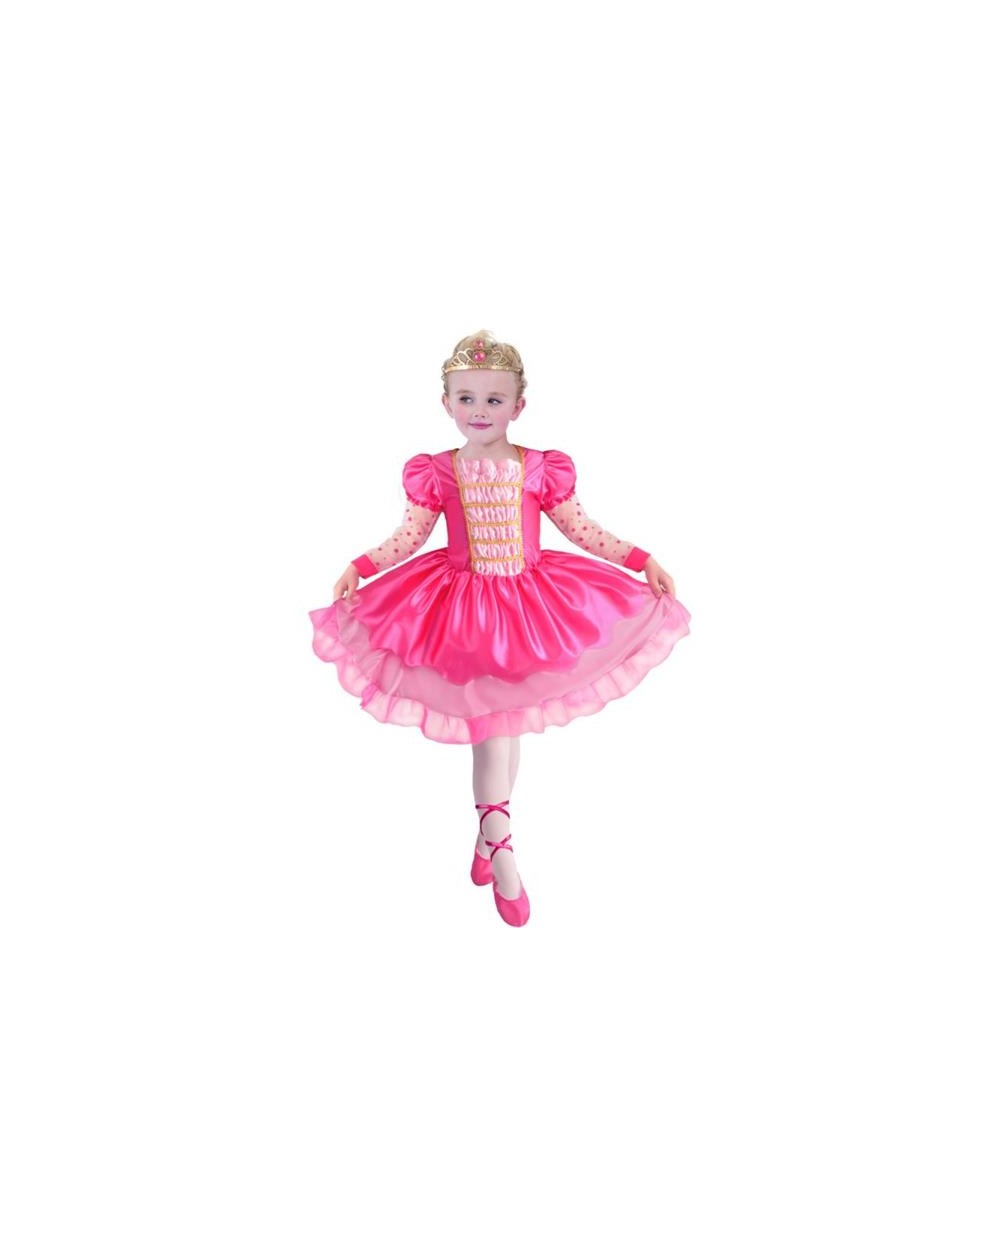 COSTUME DOLCE BALLERINA 14797  A204139